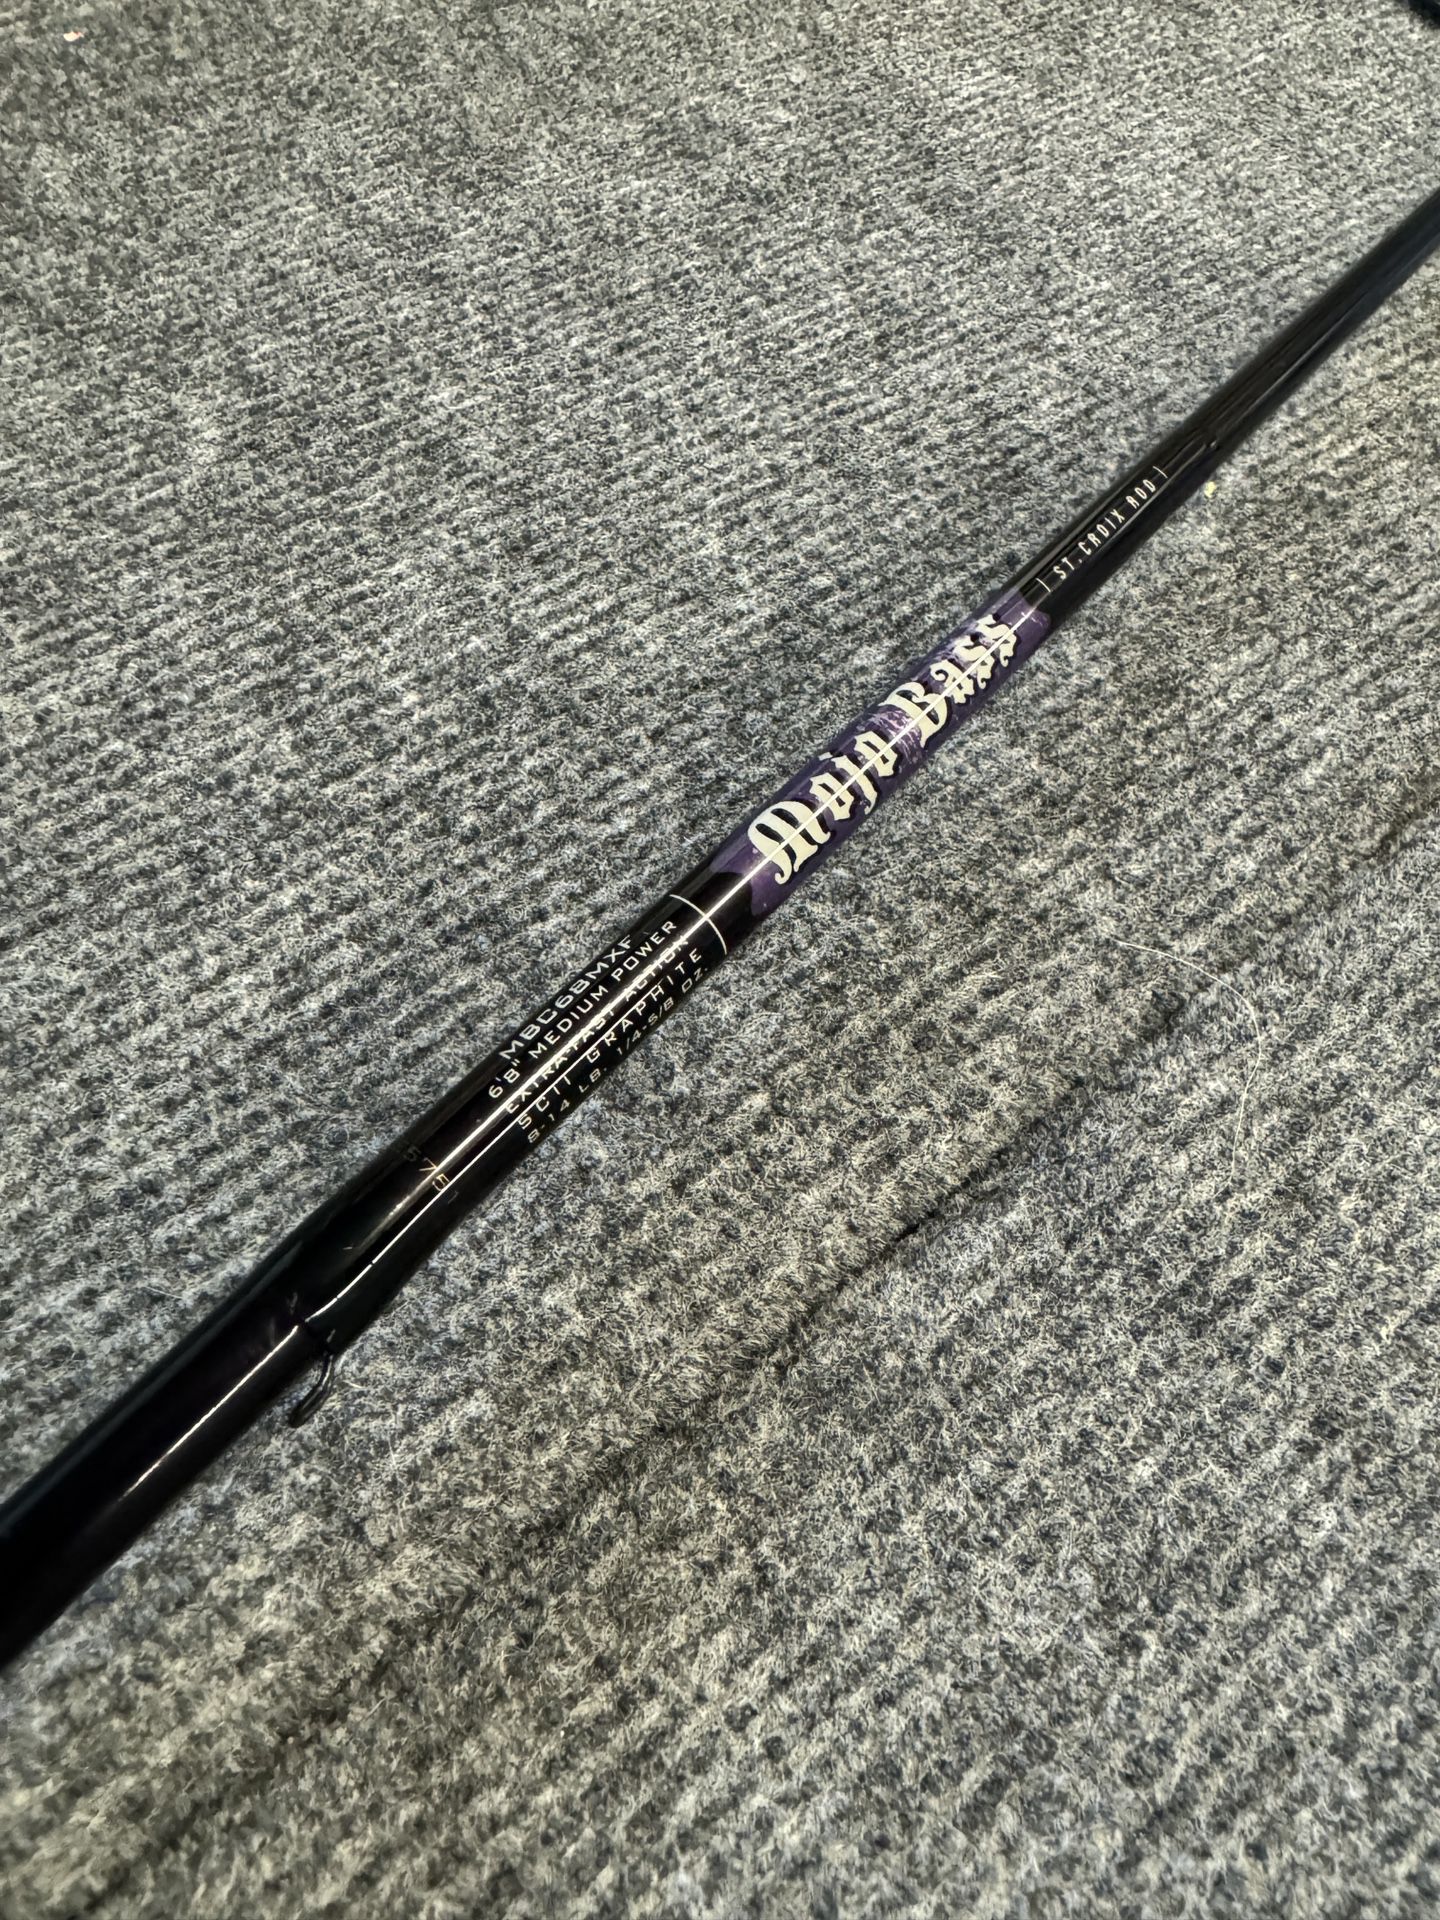 St Croix Mojo Bass Clean 6’8” 6-14 Med Fast Casting Fishing Rod 